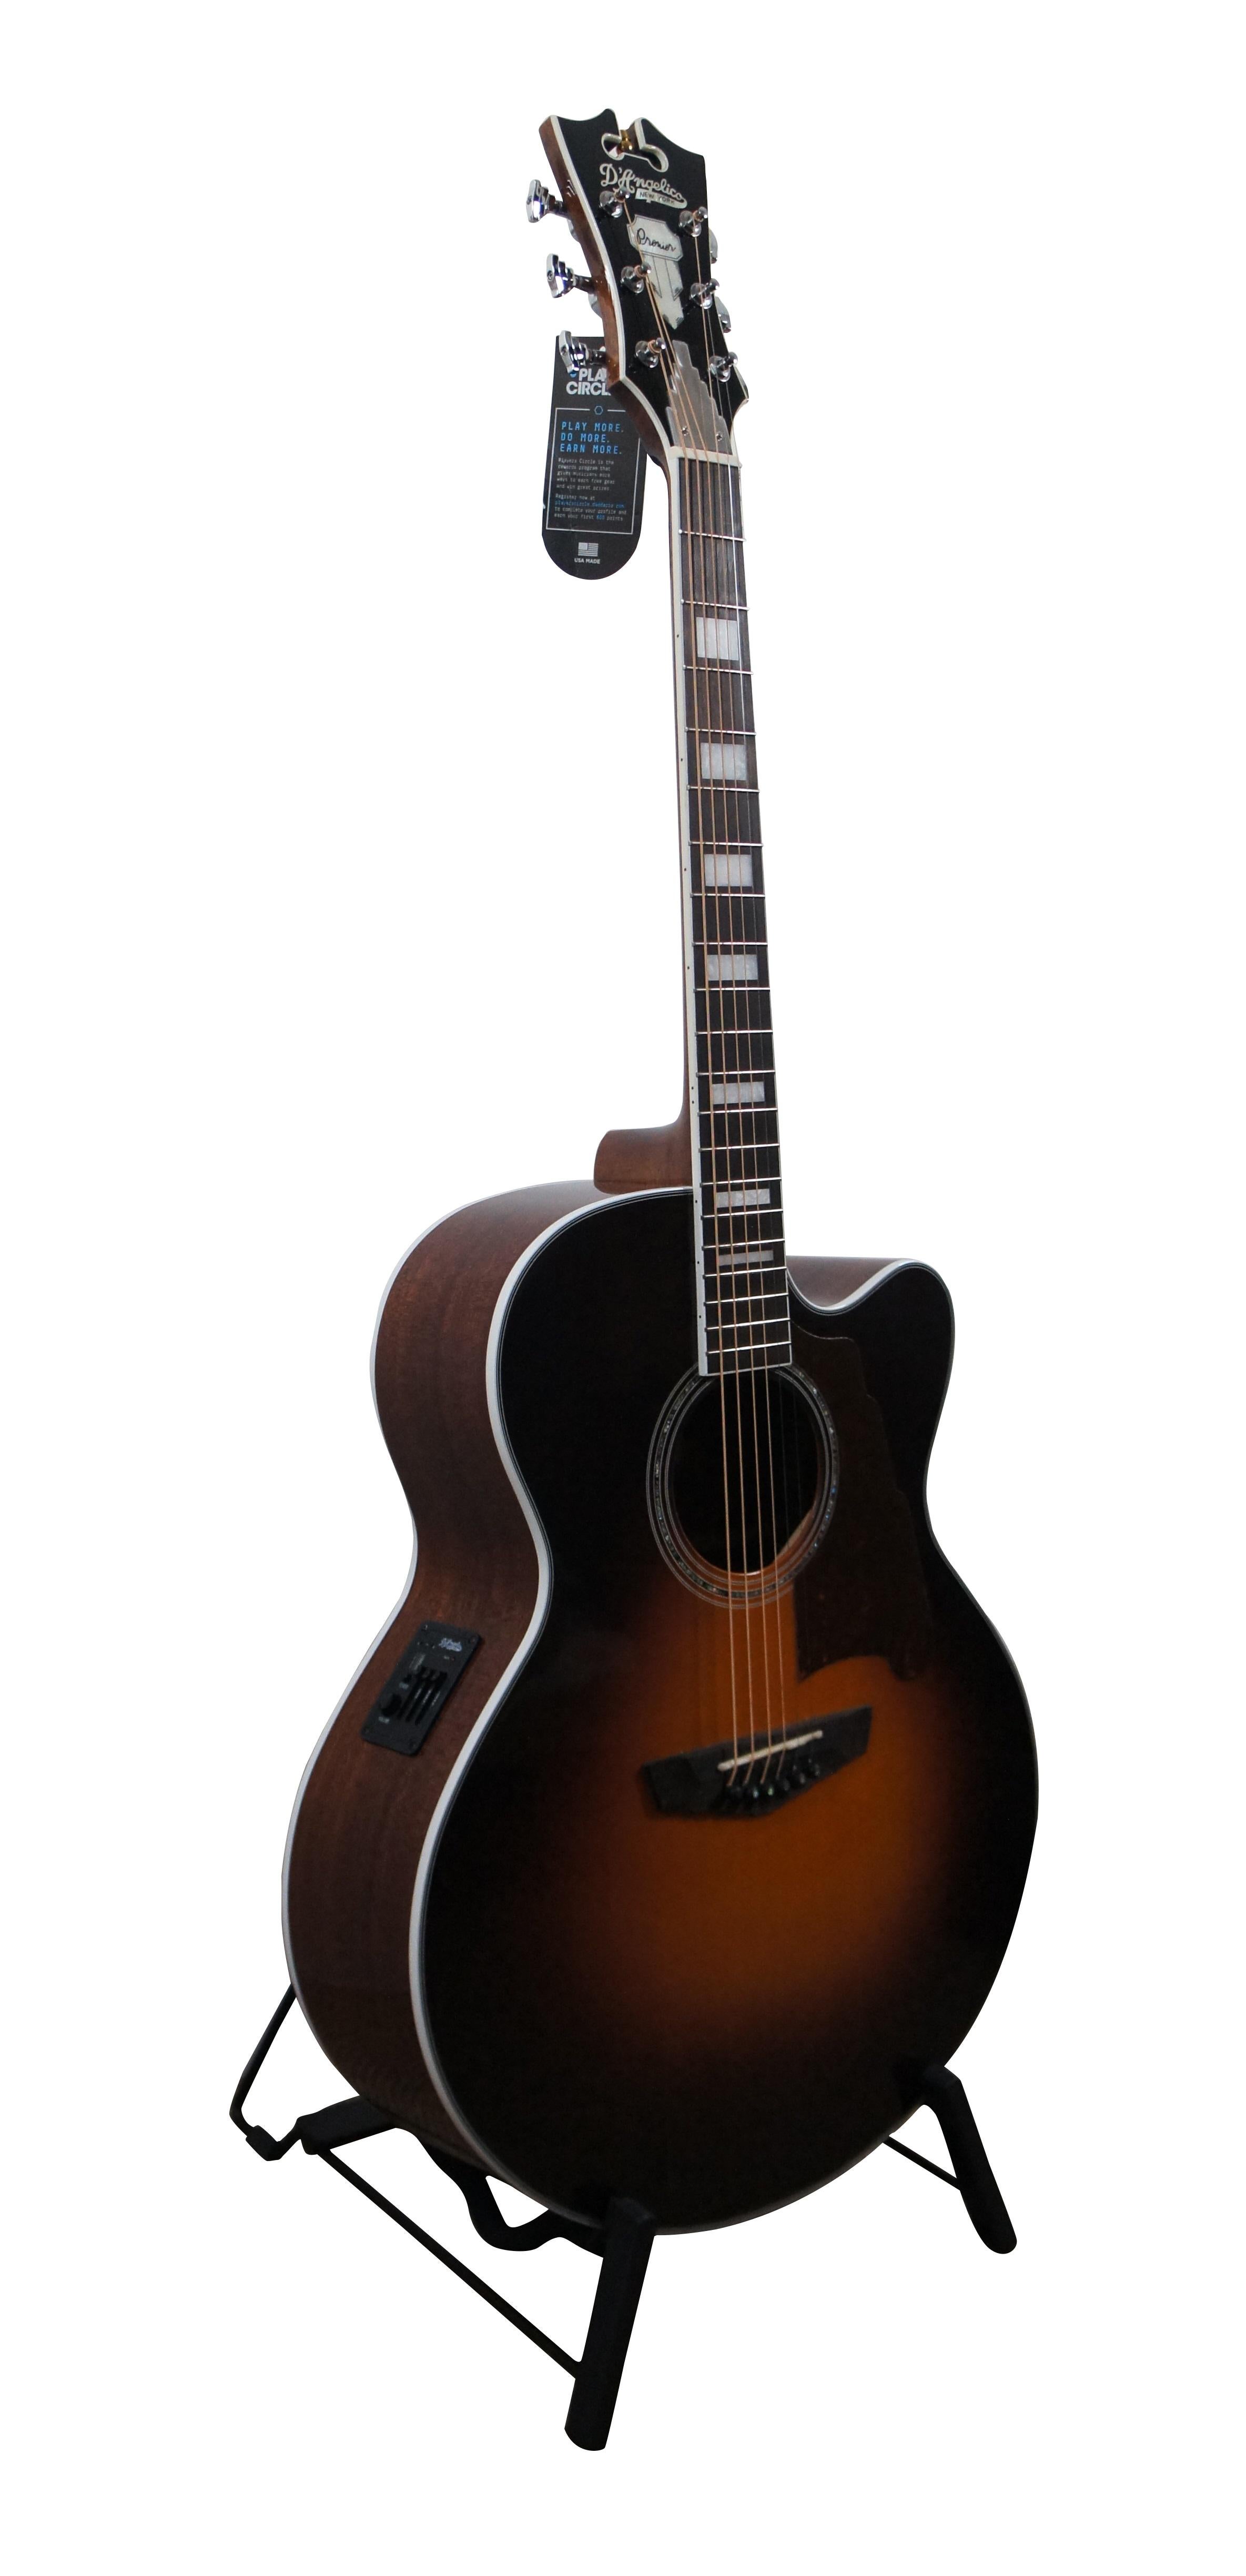 Vintage 2018 D’Angelico New York Premier Madison acoustic / electric guitar. Features: Vintage Sunburst coloring, chrome hardware, mother of pearl accents, Rotomatic Stairstep machine head, D'Addario EXP-16 (12-53) strings, ovangkol fingerboard with